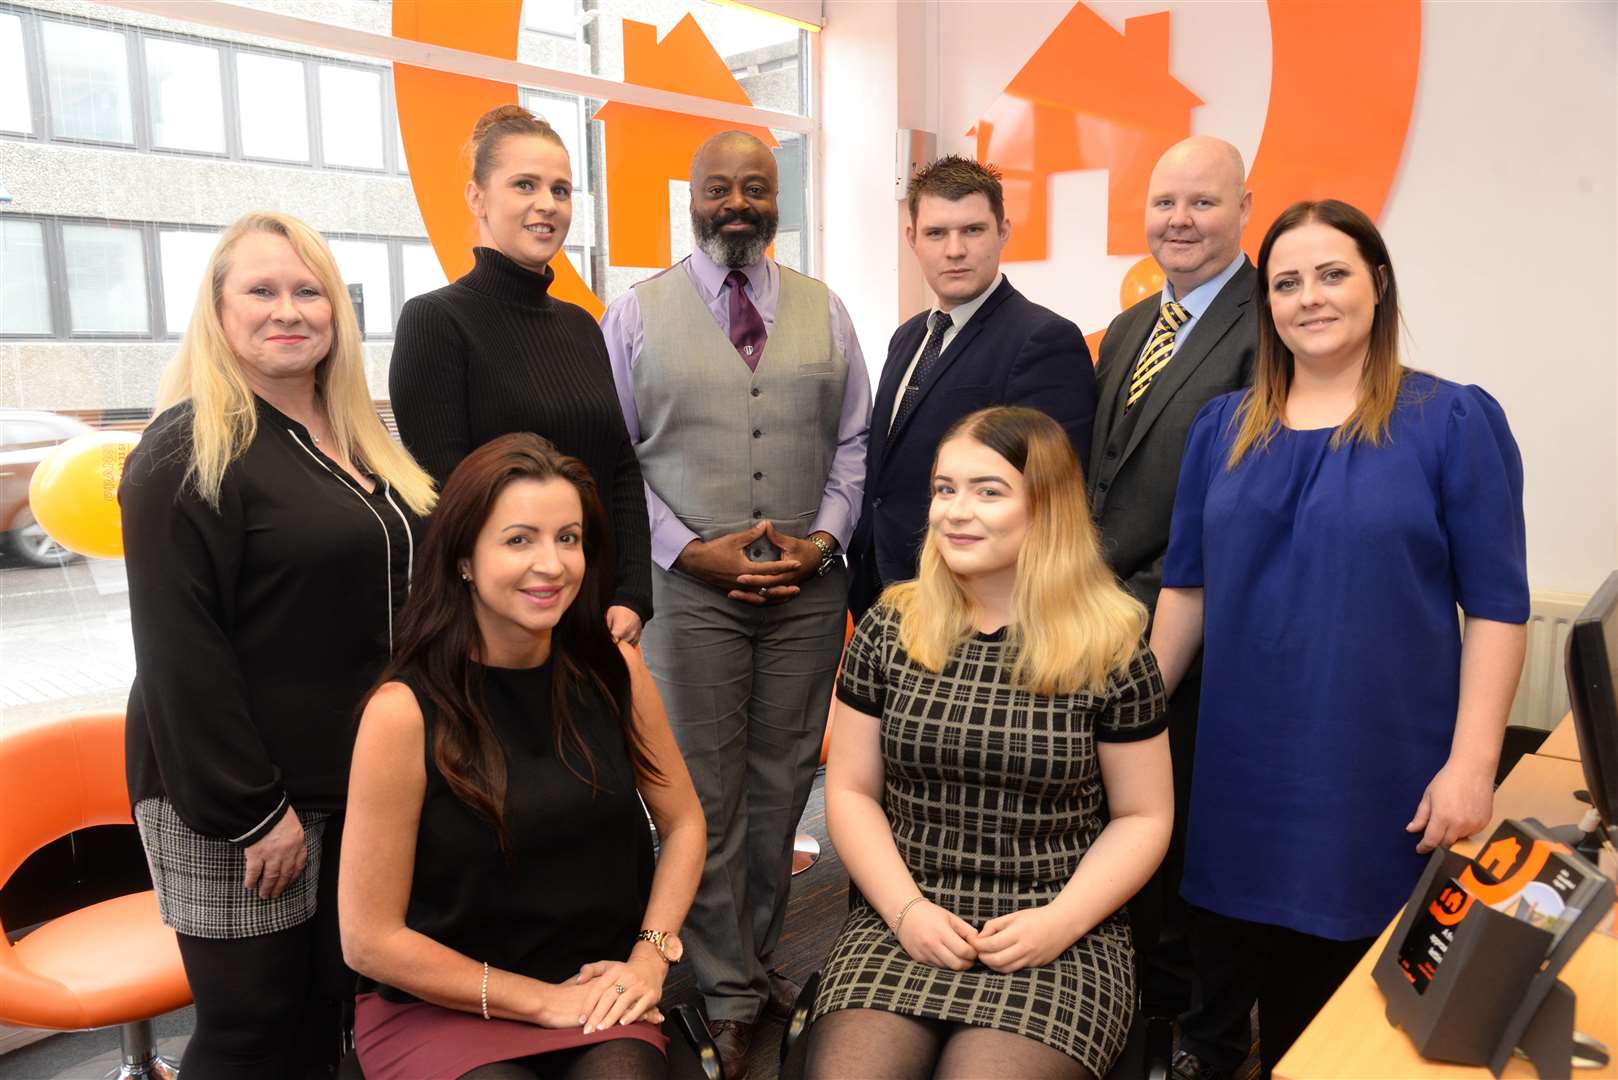 Director Nicola Leaney and staff at Orange Property Services